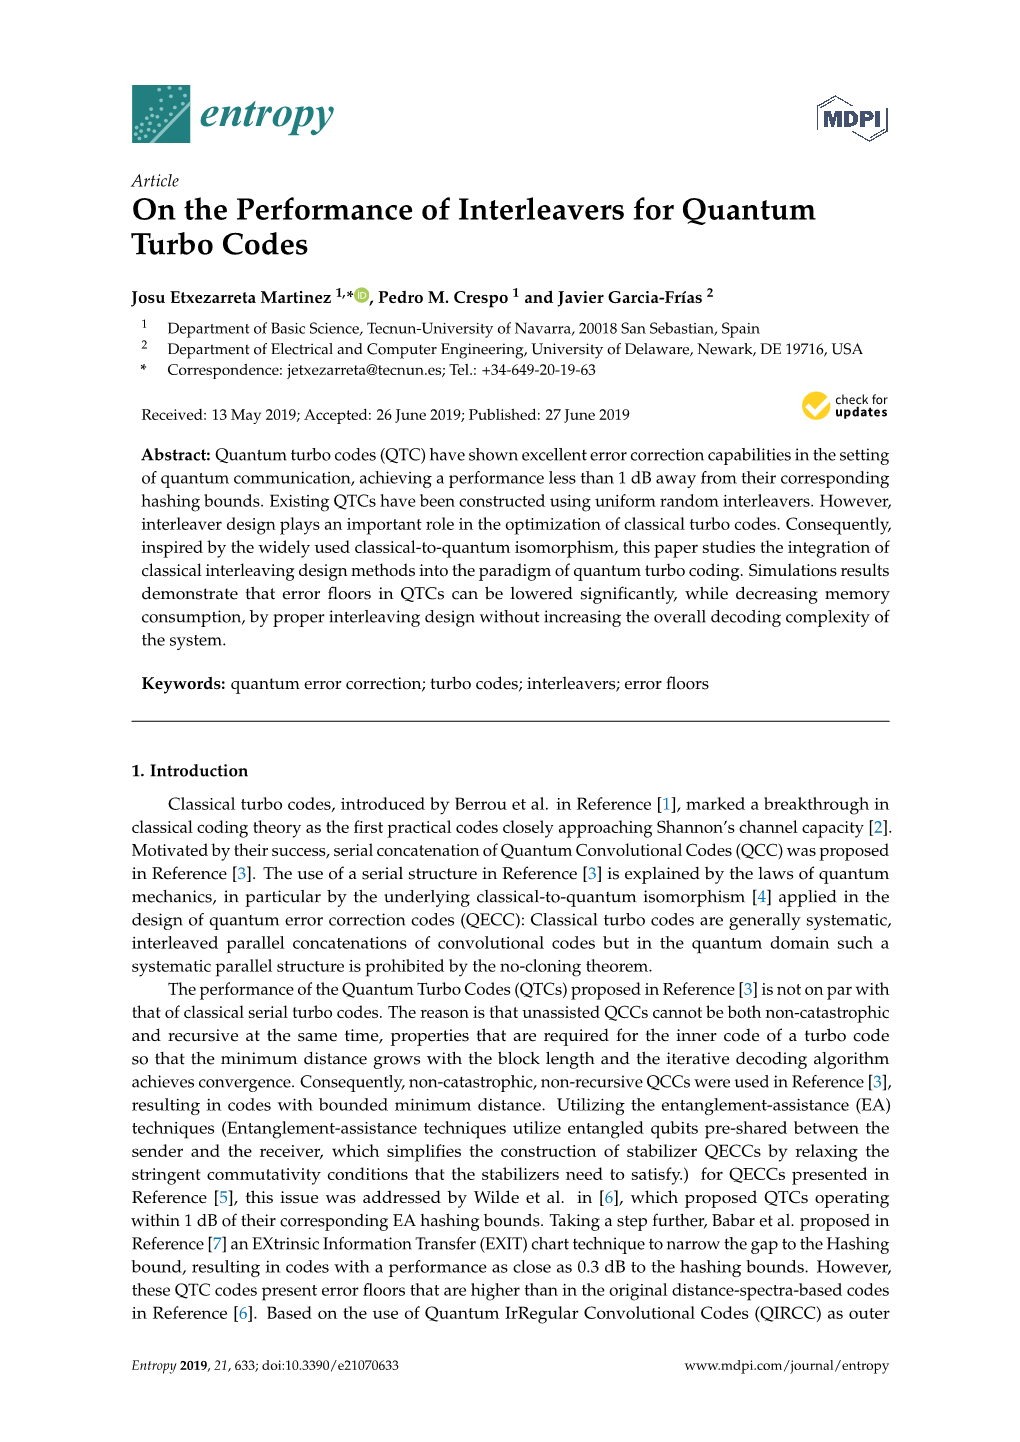 On the Performance of Interleavers for Quantum Turbo Codes